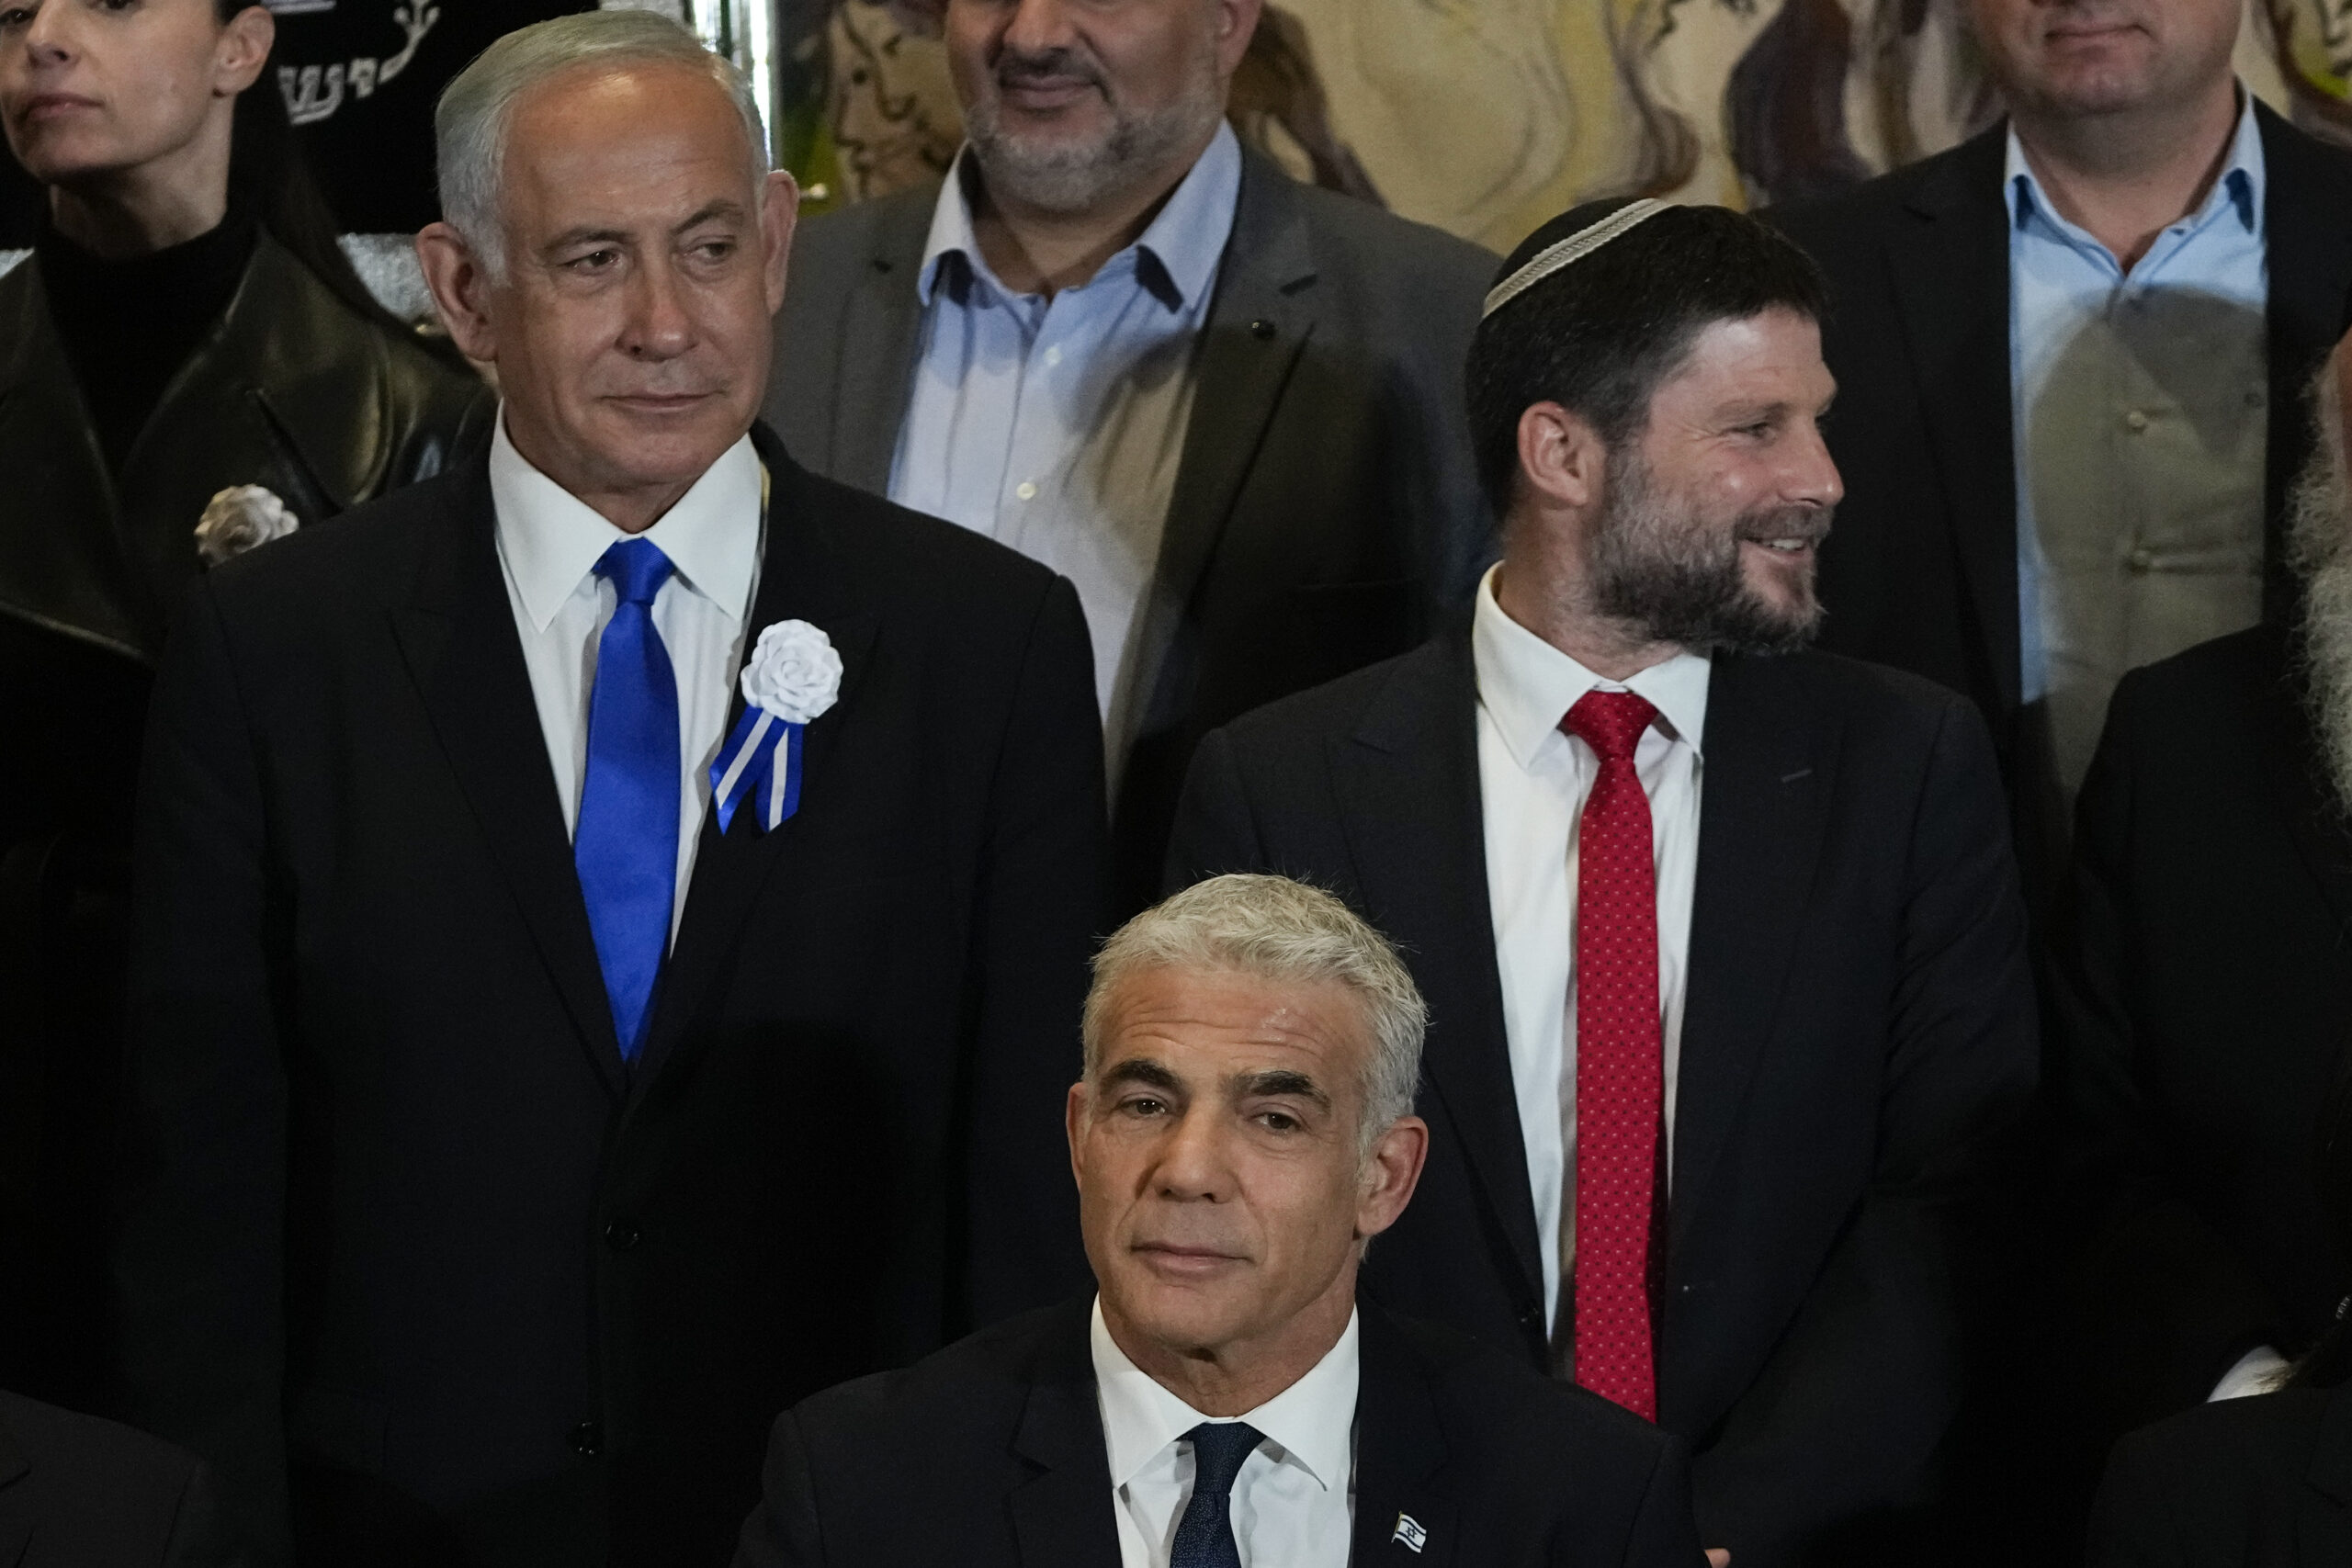 FILE-Israeli Prime Minister Yair Lapid, center, Likud Party leader Benjamin Netanyahu, left, far-right Israeli lawmaker Bezalel Smotrich and leaders of all Israel's political parties pose for a group photo after the swearing-in ceremony for Israeli lawmakers at the Knesset, Israel's parliament, in Jerusalem, Tuesday, Nov. 15, 2022. Israel's designated prime minister, Benjamin Netanyahu, has announced a coalition deal with a hardline pro-settler party on Thursday, Dec. 1, 2022. The agreement will give Religious Zionism control over a number of key government ministries and a senior post over West Bank settlement construction. (AP Photo/Tsafrir Abayov, File)